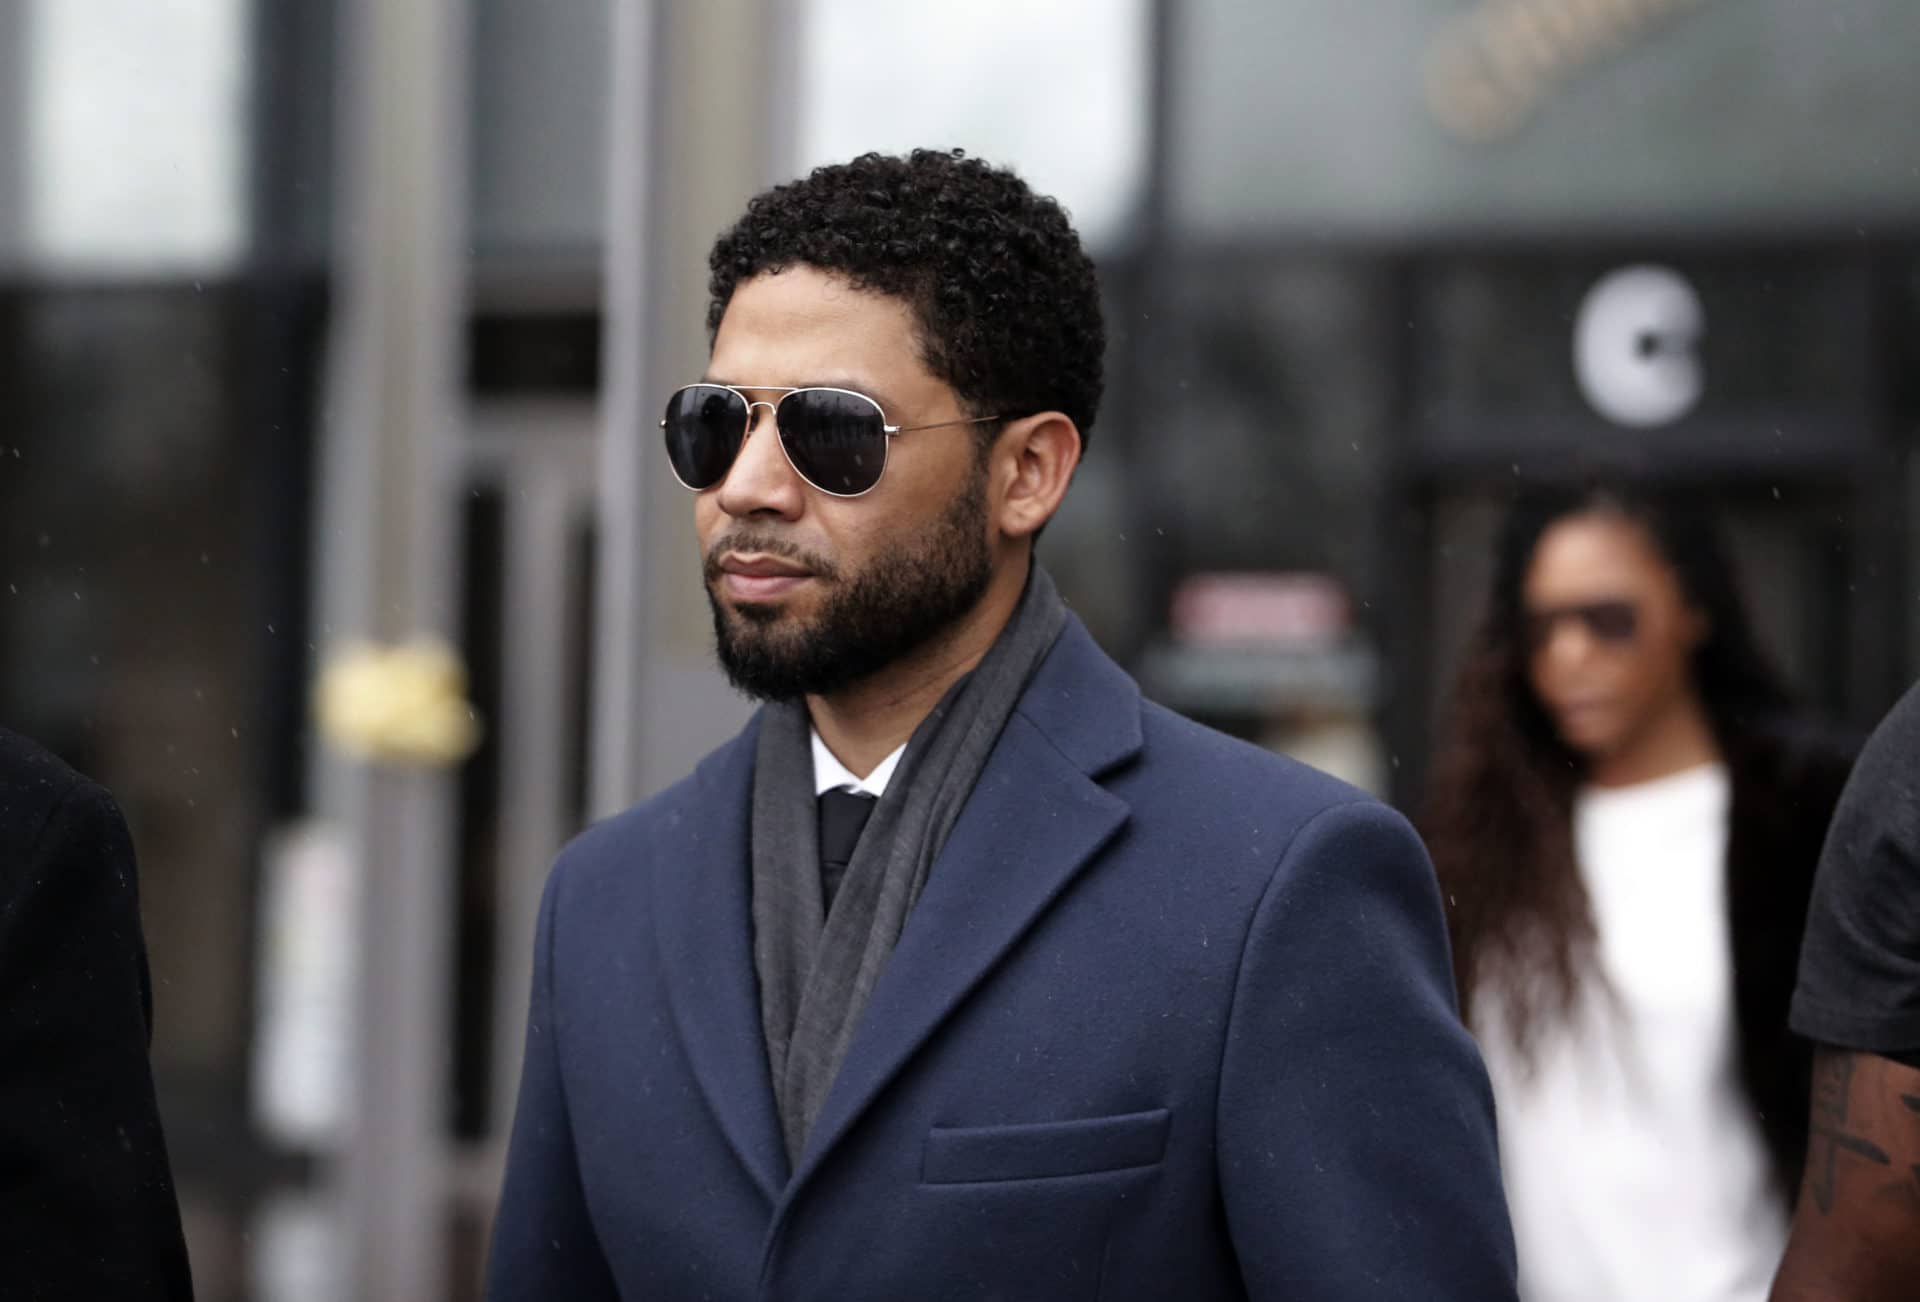 Jussie Smollett Countersues City Of Chicago For 'Maliciously' Prosecuting Him After Alleged Attack